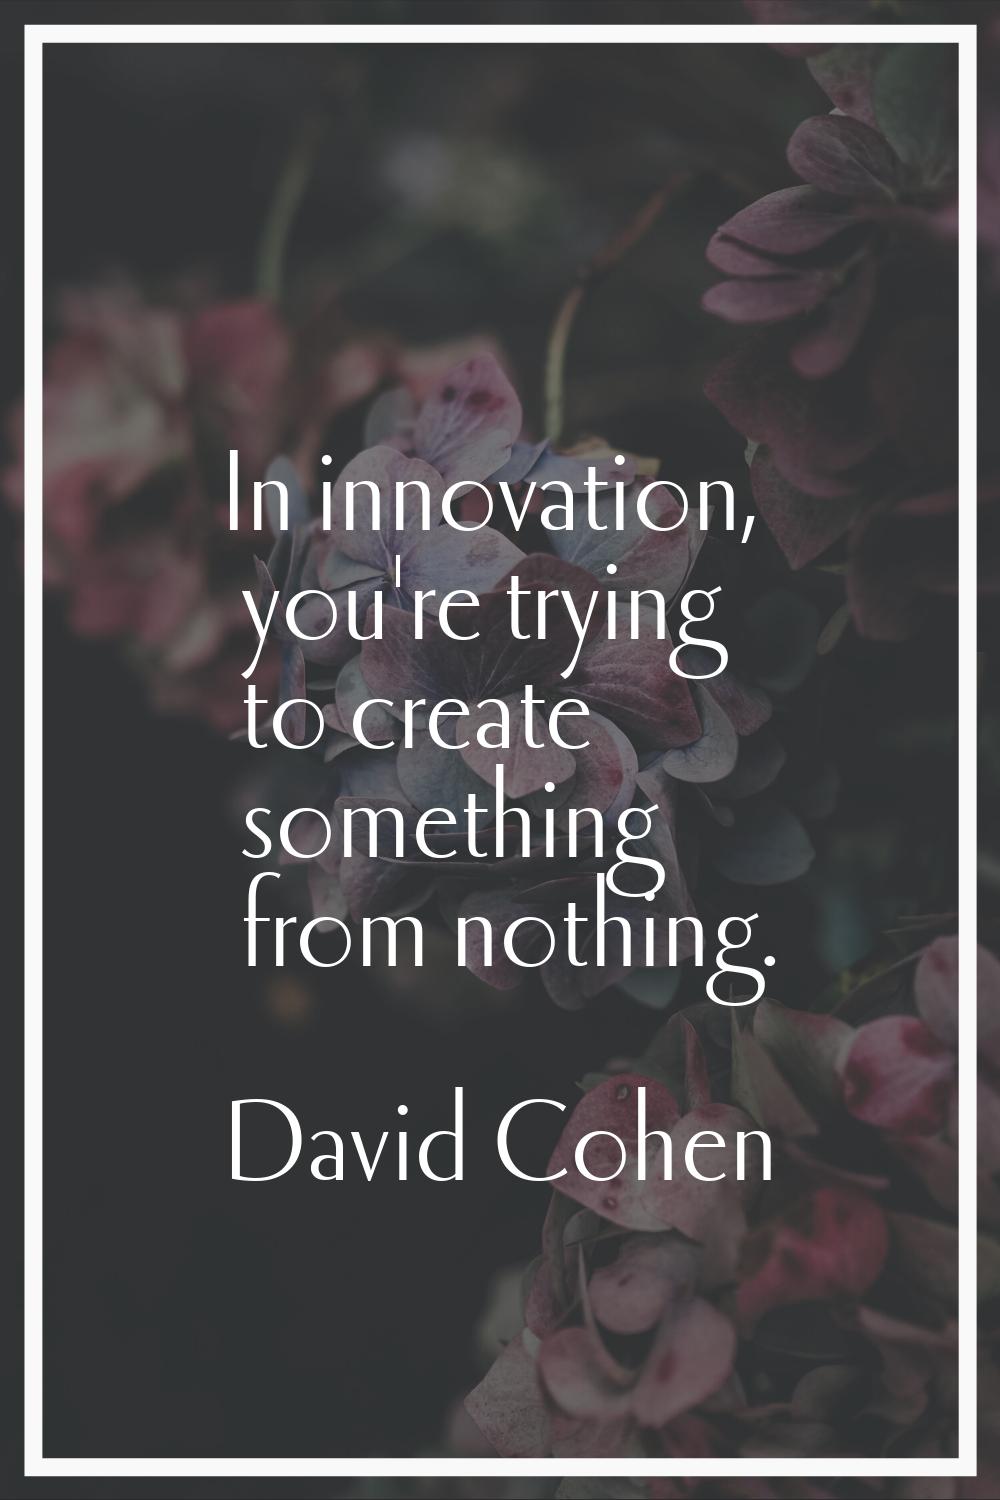 In innovation, you're trying to create something from nothing.